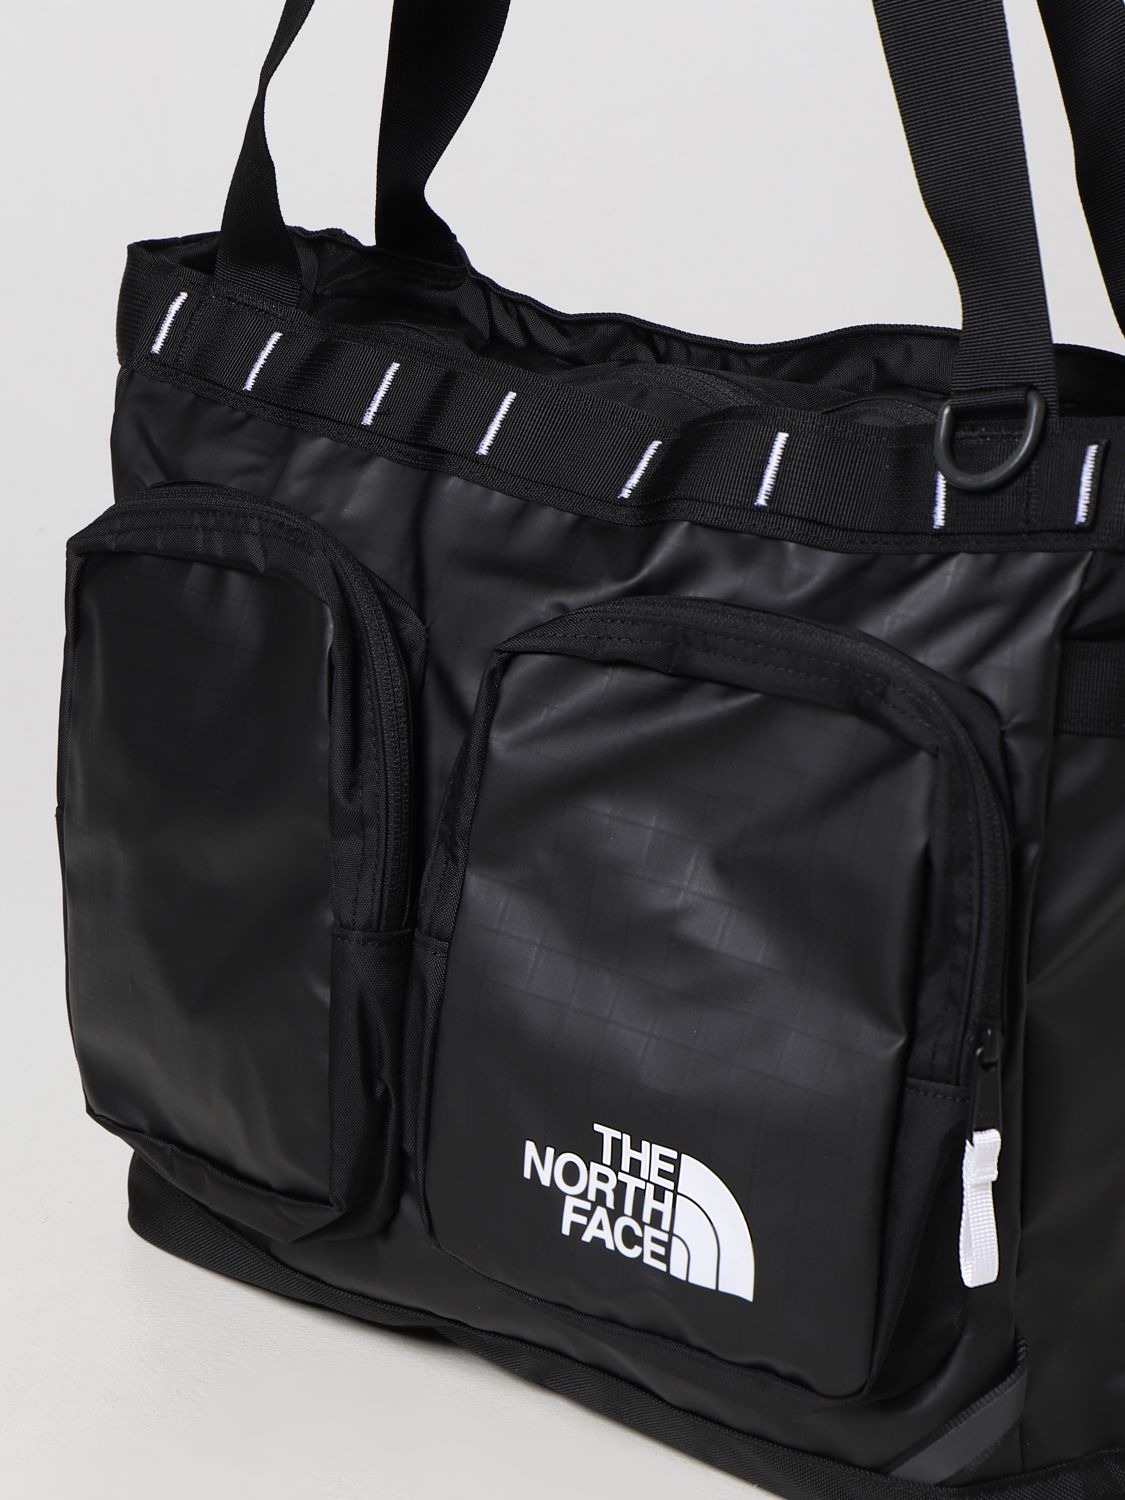 THE NORTH FACE: bags for man - Black | The North Face bags NF0A81BM